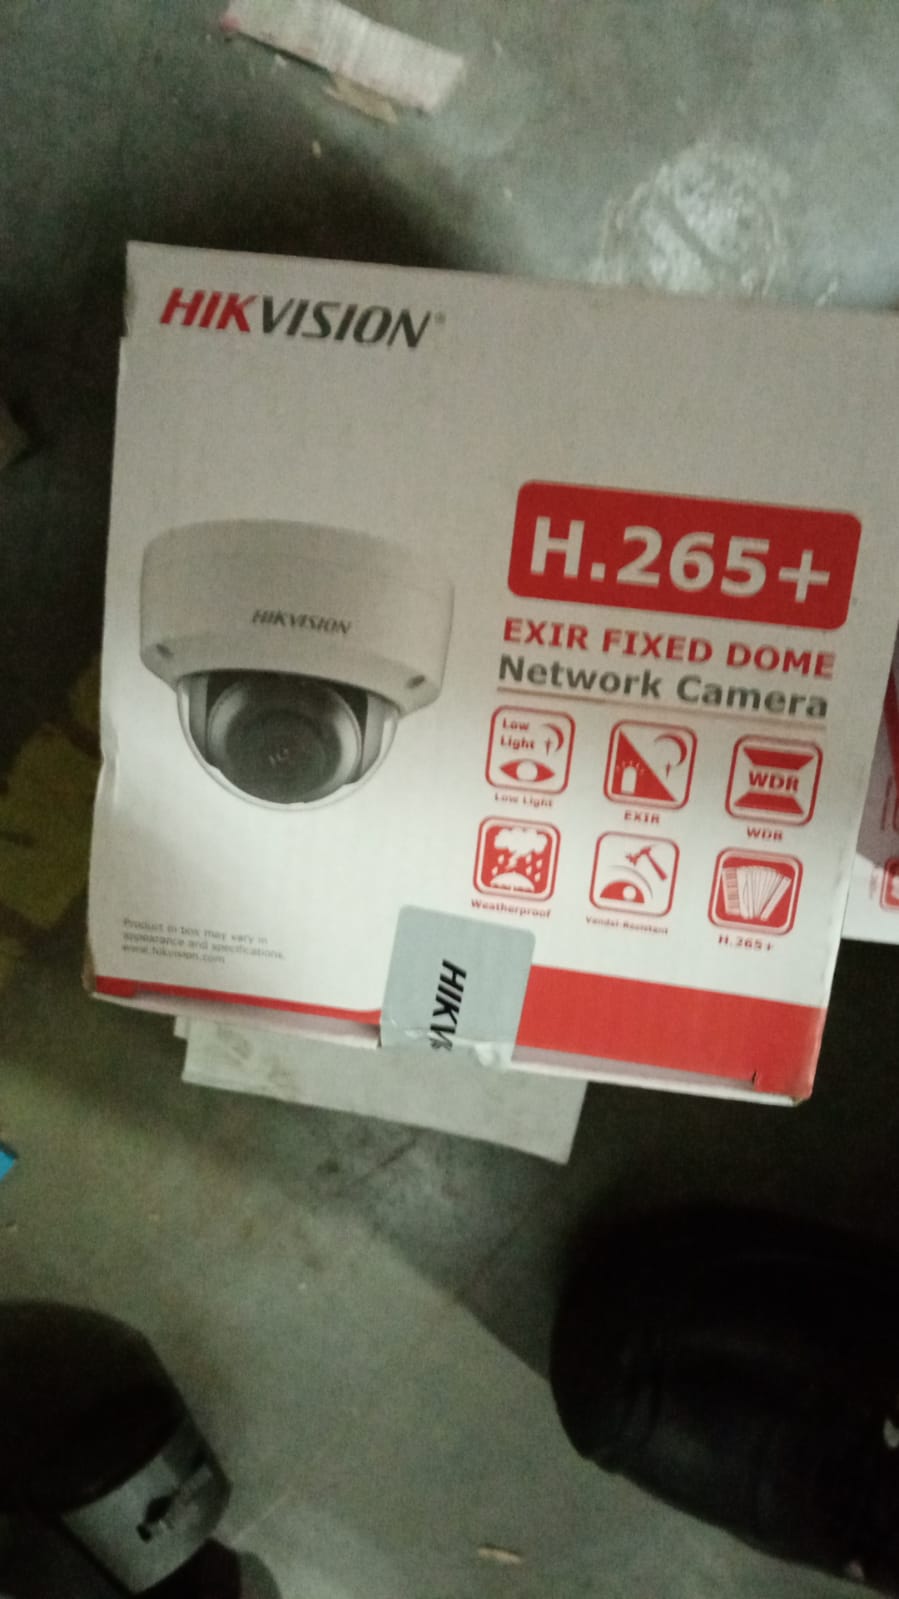 4 MP IP cameras / 4 MP Network Cameras . Brand new. Hikvision Acusense 4 MP netw